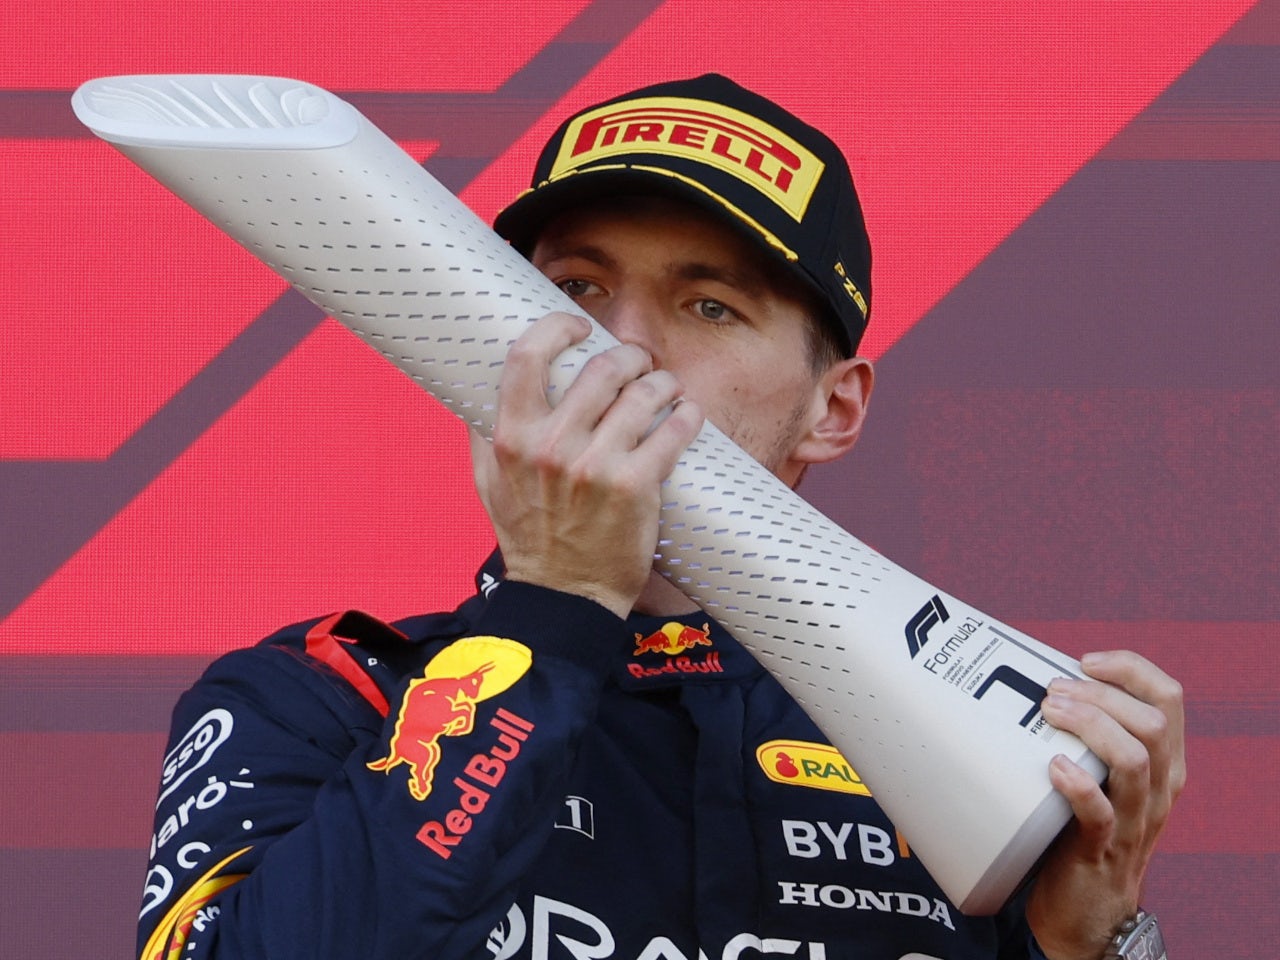 Verstappen wins in Japan to move to brink of world title